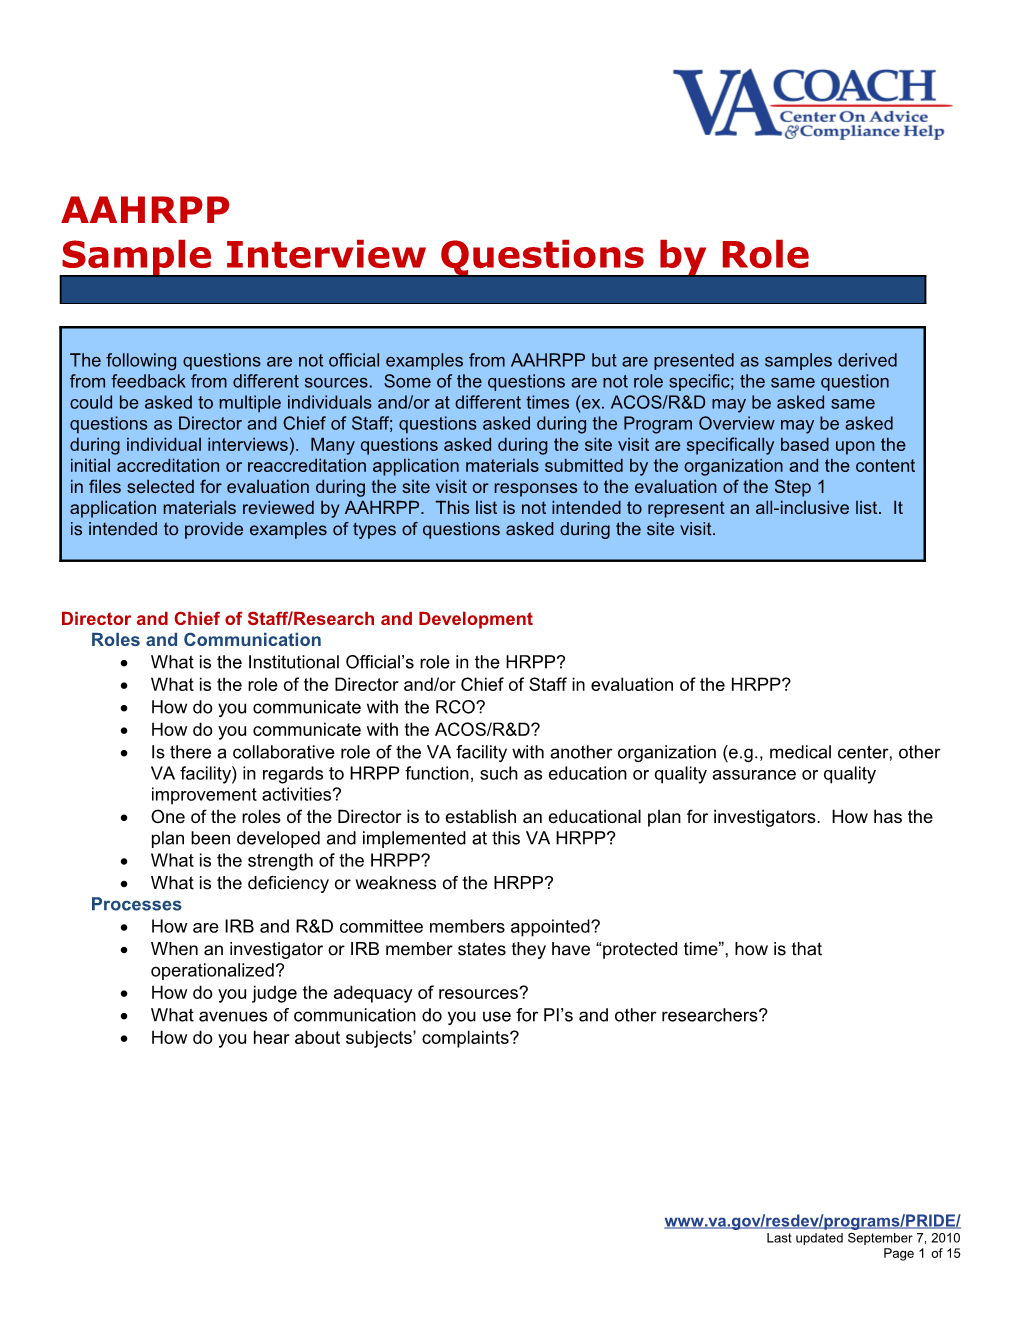 AAHRPP Sample Interview Questions by Role